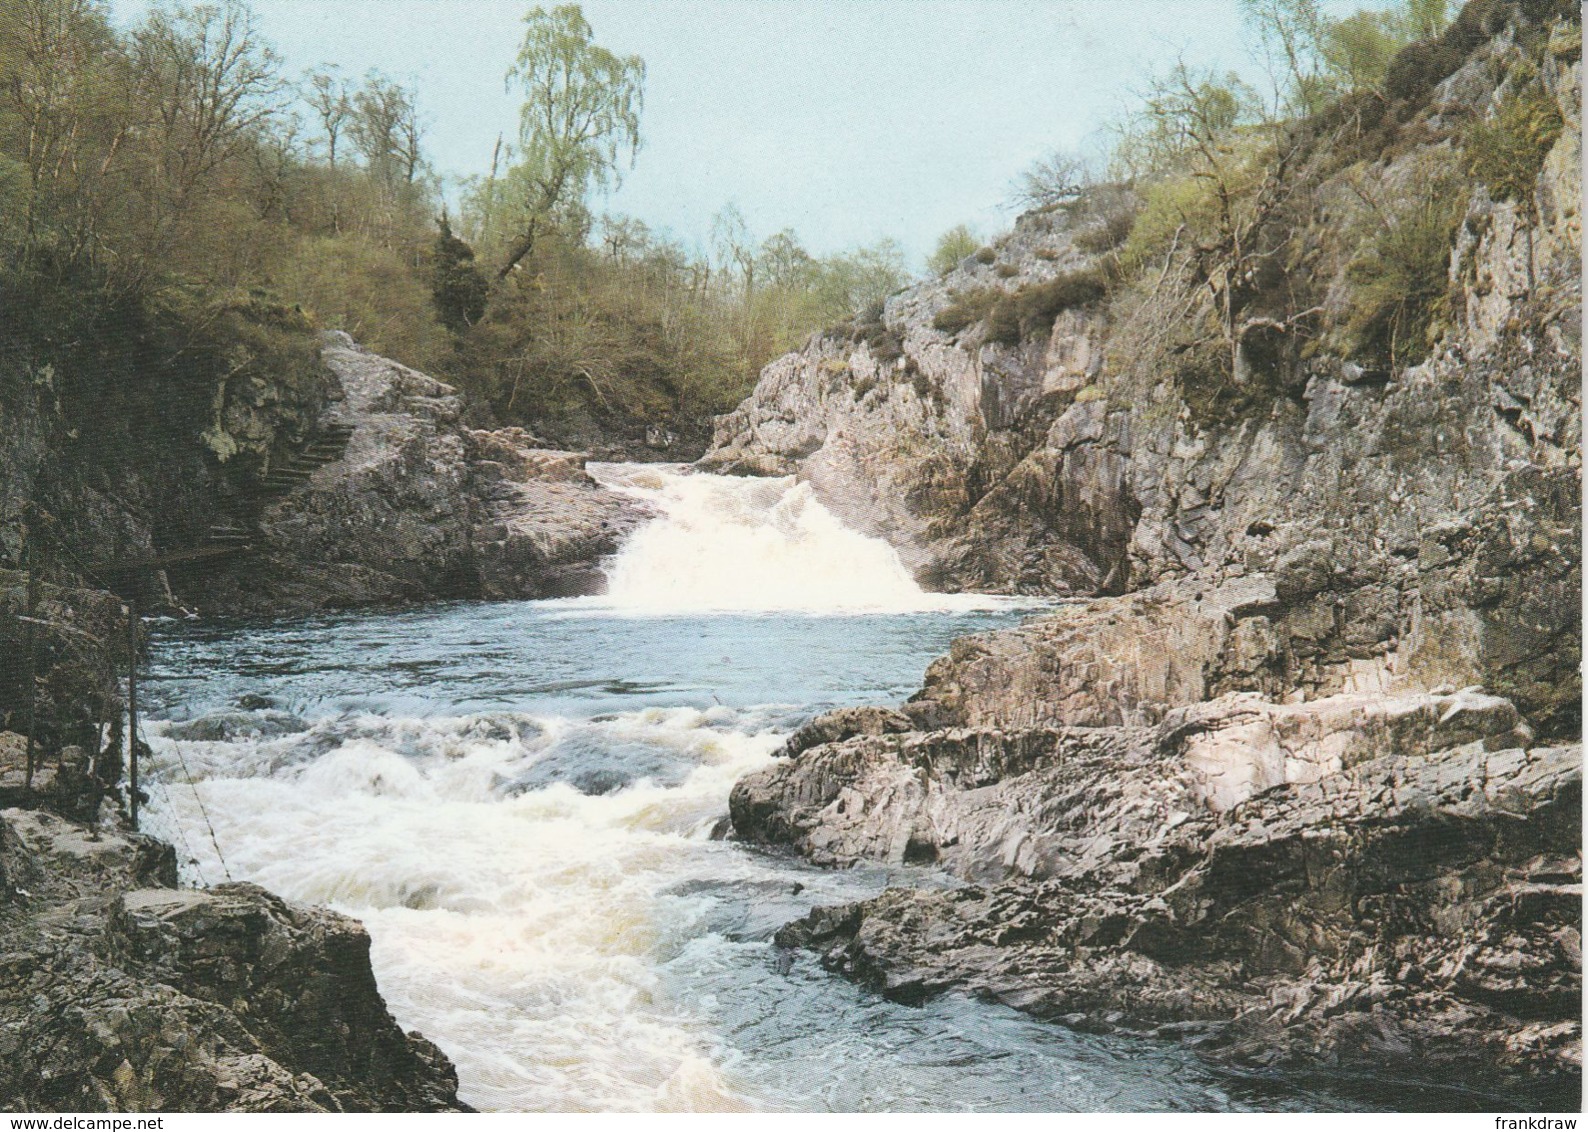 Postcard - The Falls Of Shin, Sutherland - Card No.84072 Unused Very Good - Unclassified